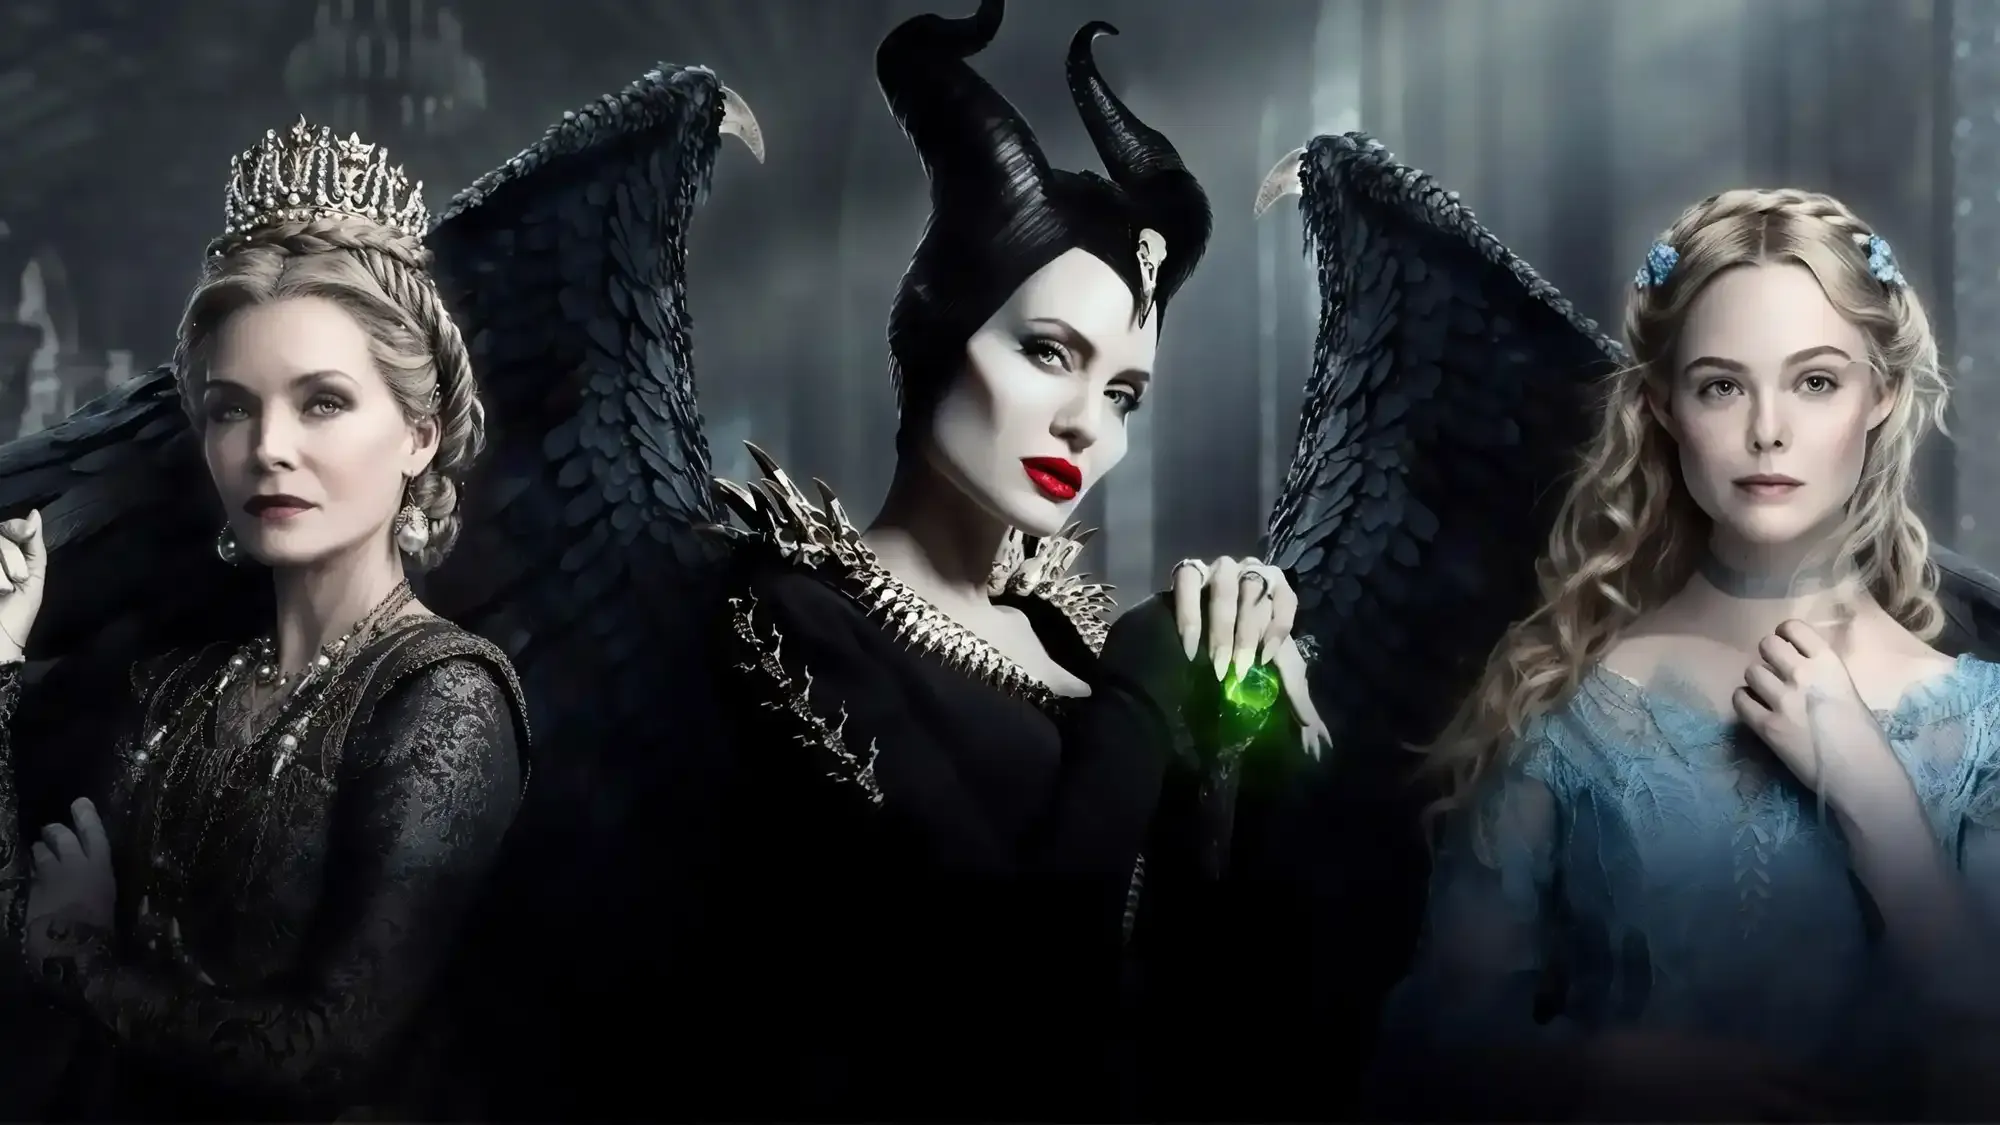 Maleficent: Mistress of Evil movie review